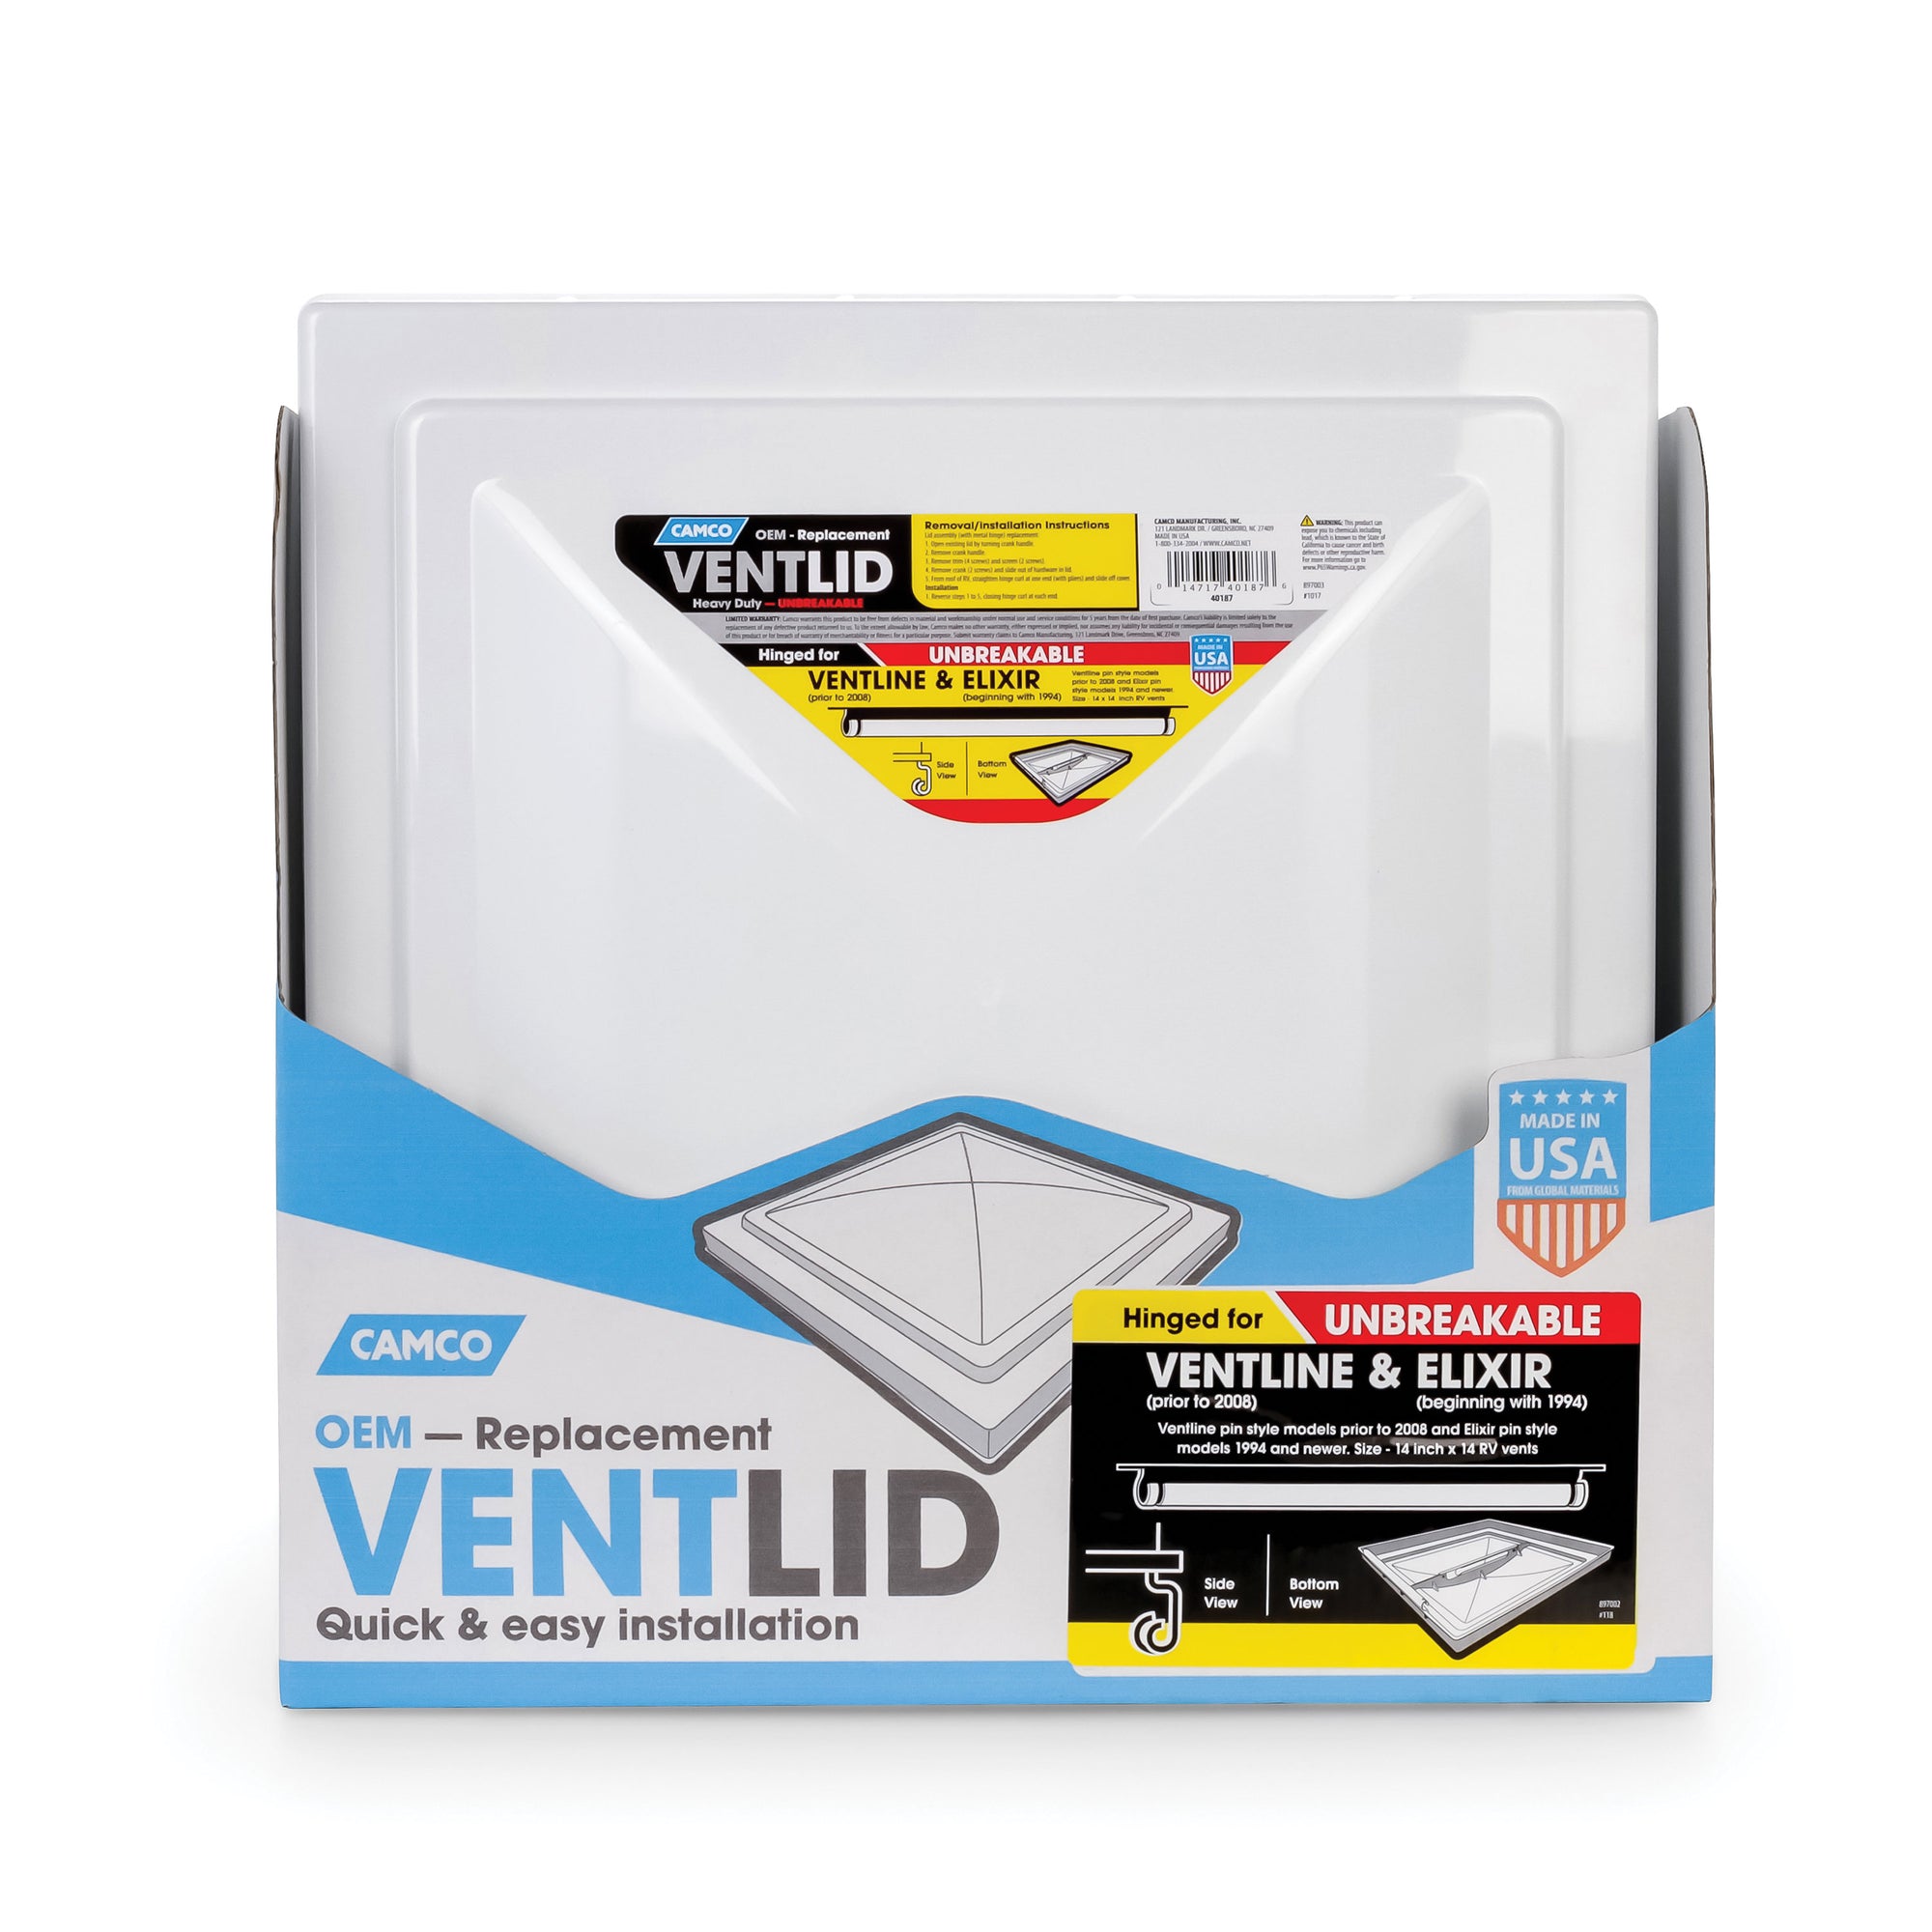 Camco 40187 Vent Lid Replacement for Pre-2008 Ventline Models